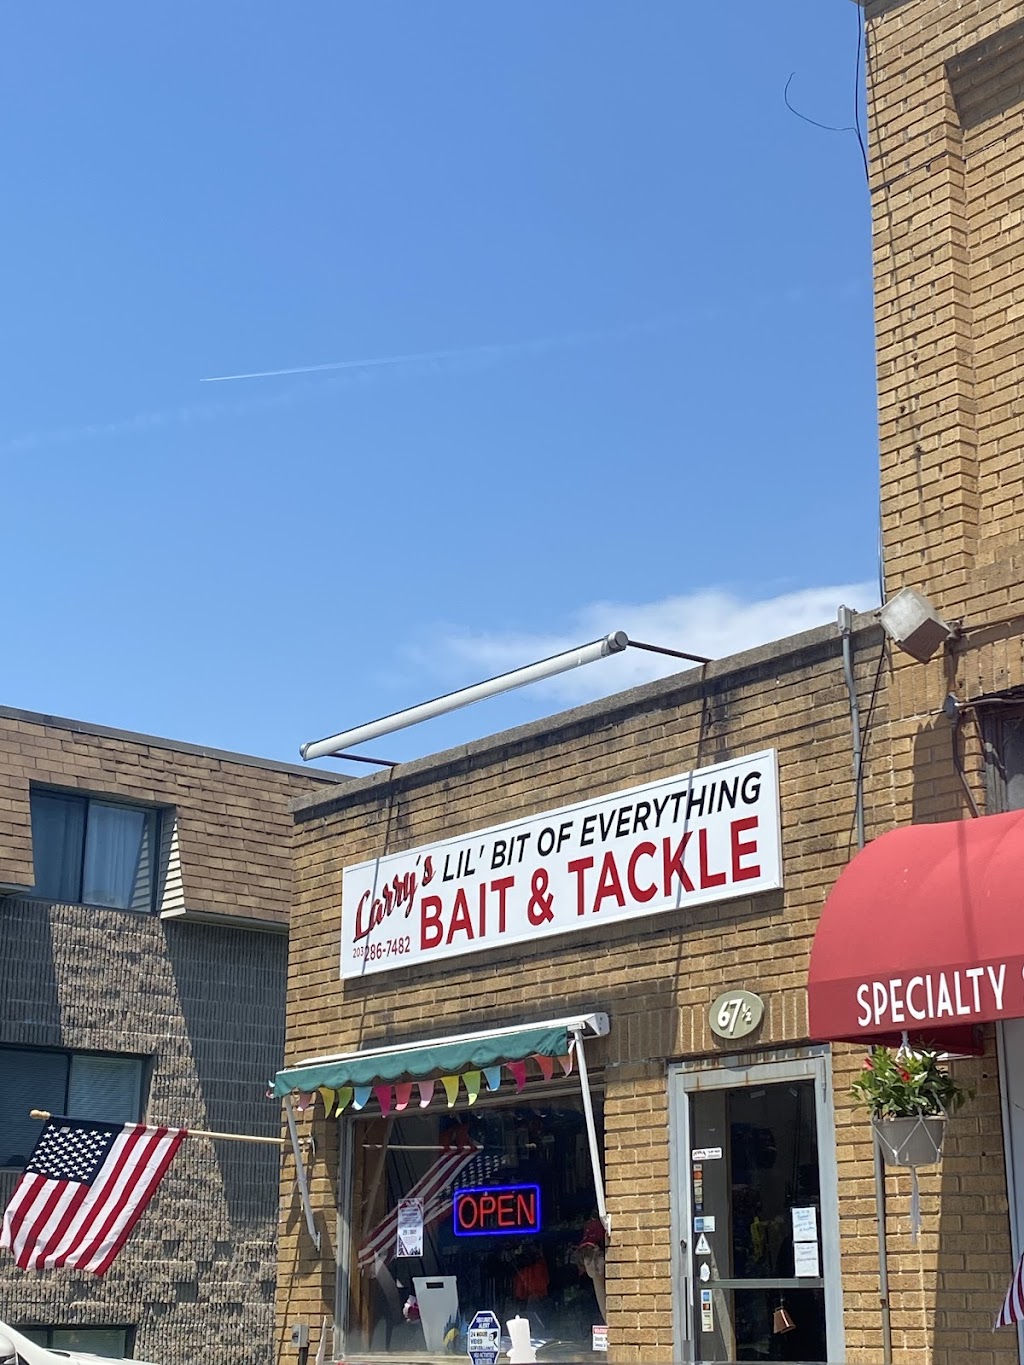 Larry’s Little Bit of Everything, Bait and Tackle | 67 Winfield St, Norwalk, CT 06855 | Phone: (203) 286-7482